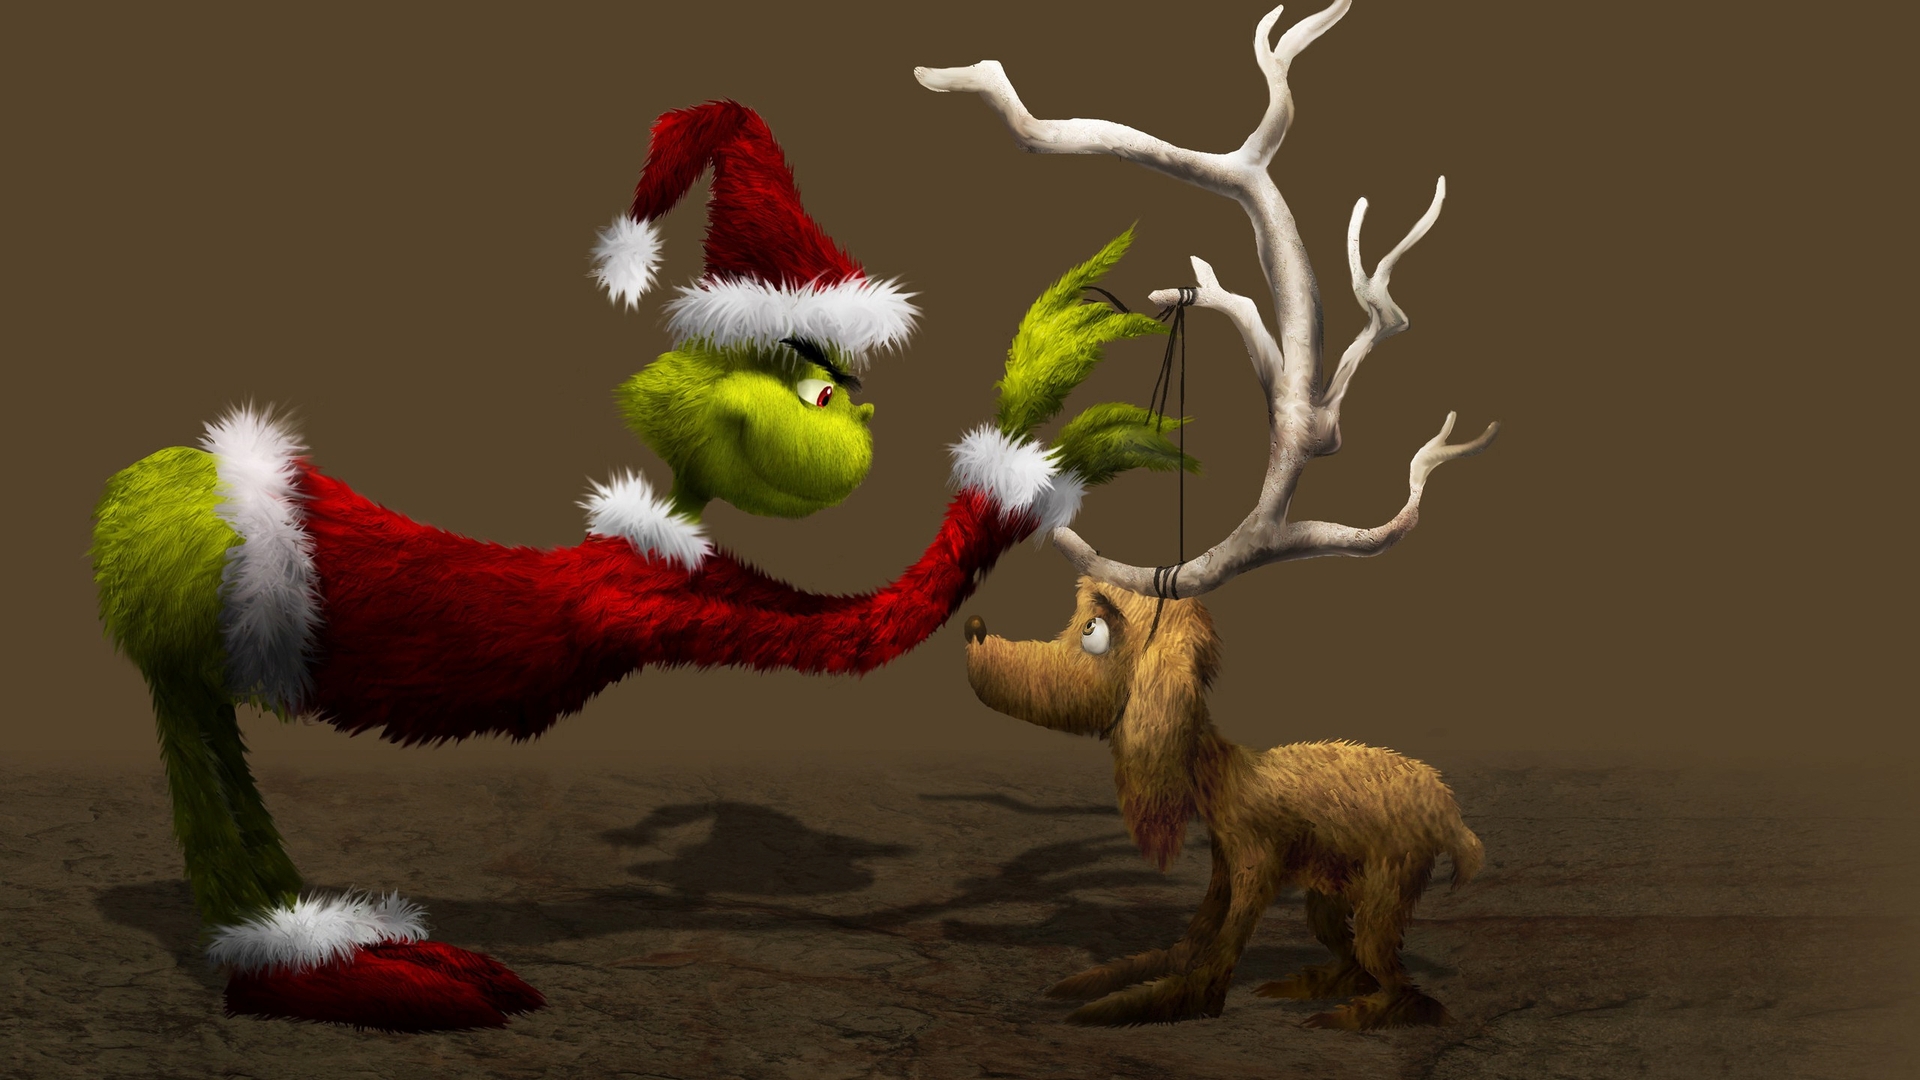 HD wallpaper Movie Dr Seuss How the Grinch Stole Christmas Holiday   Wallpaper Flare